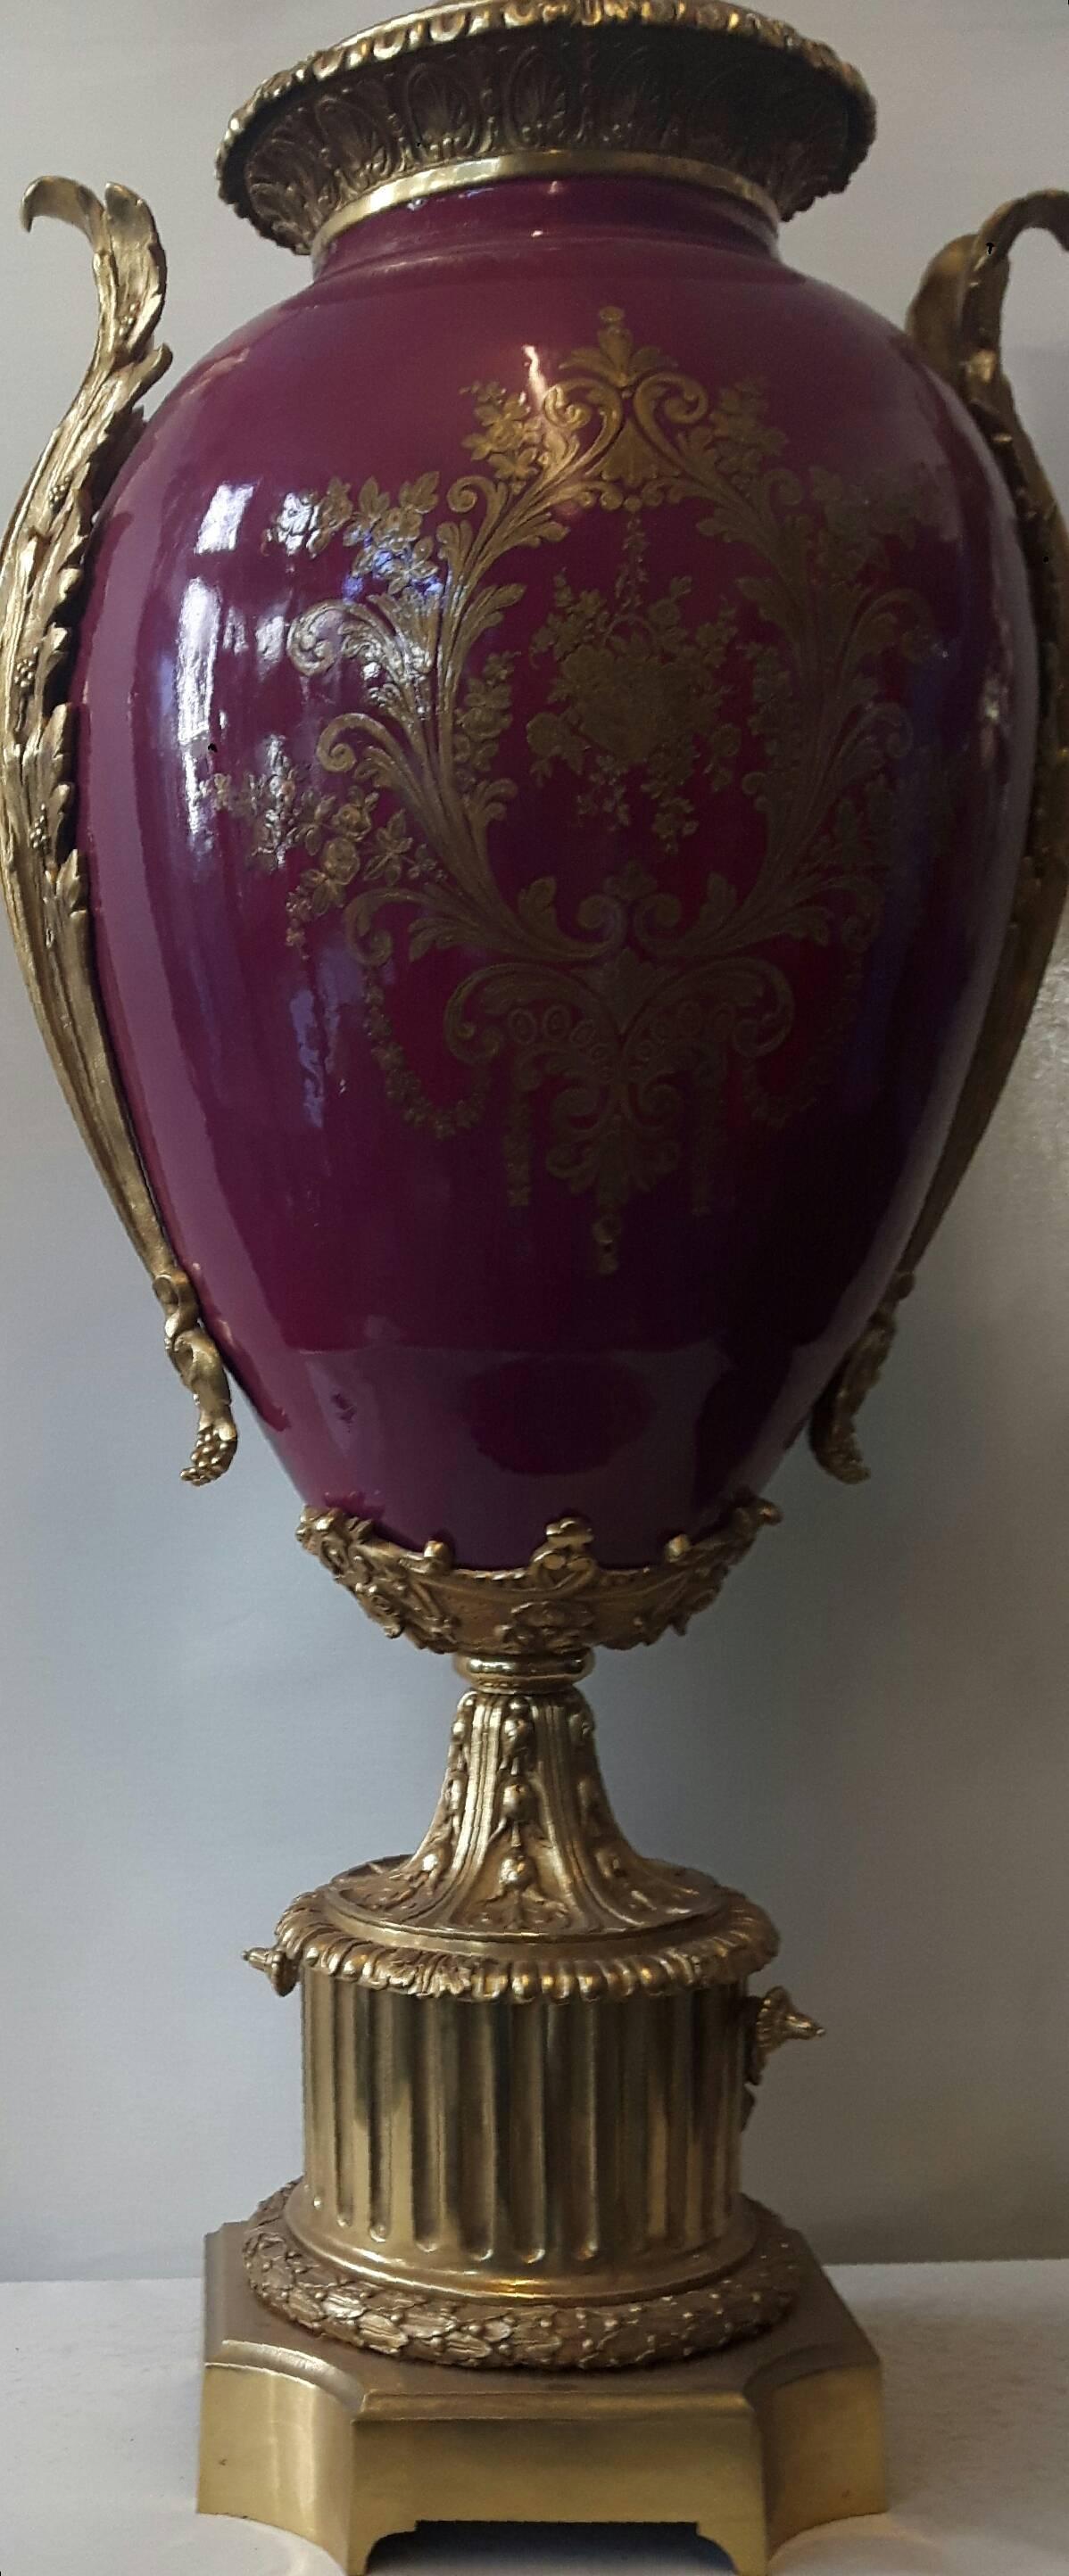 A lovely Sèvres -style porcelain and ormolu vase on a burgundy red background, the front is hand-painted with a mythological scene of Venus whilst the back of the vase is elaborately gilded,
French, circa 1880.